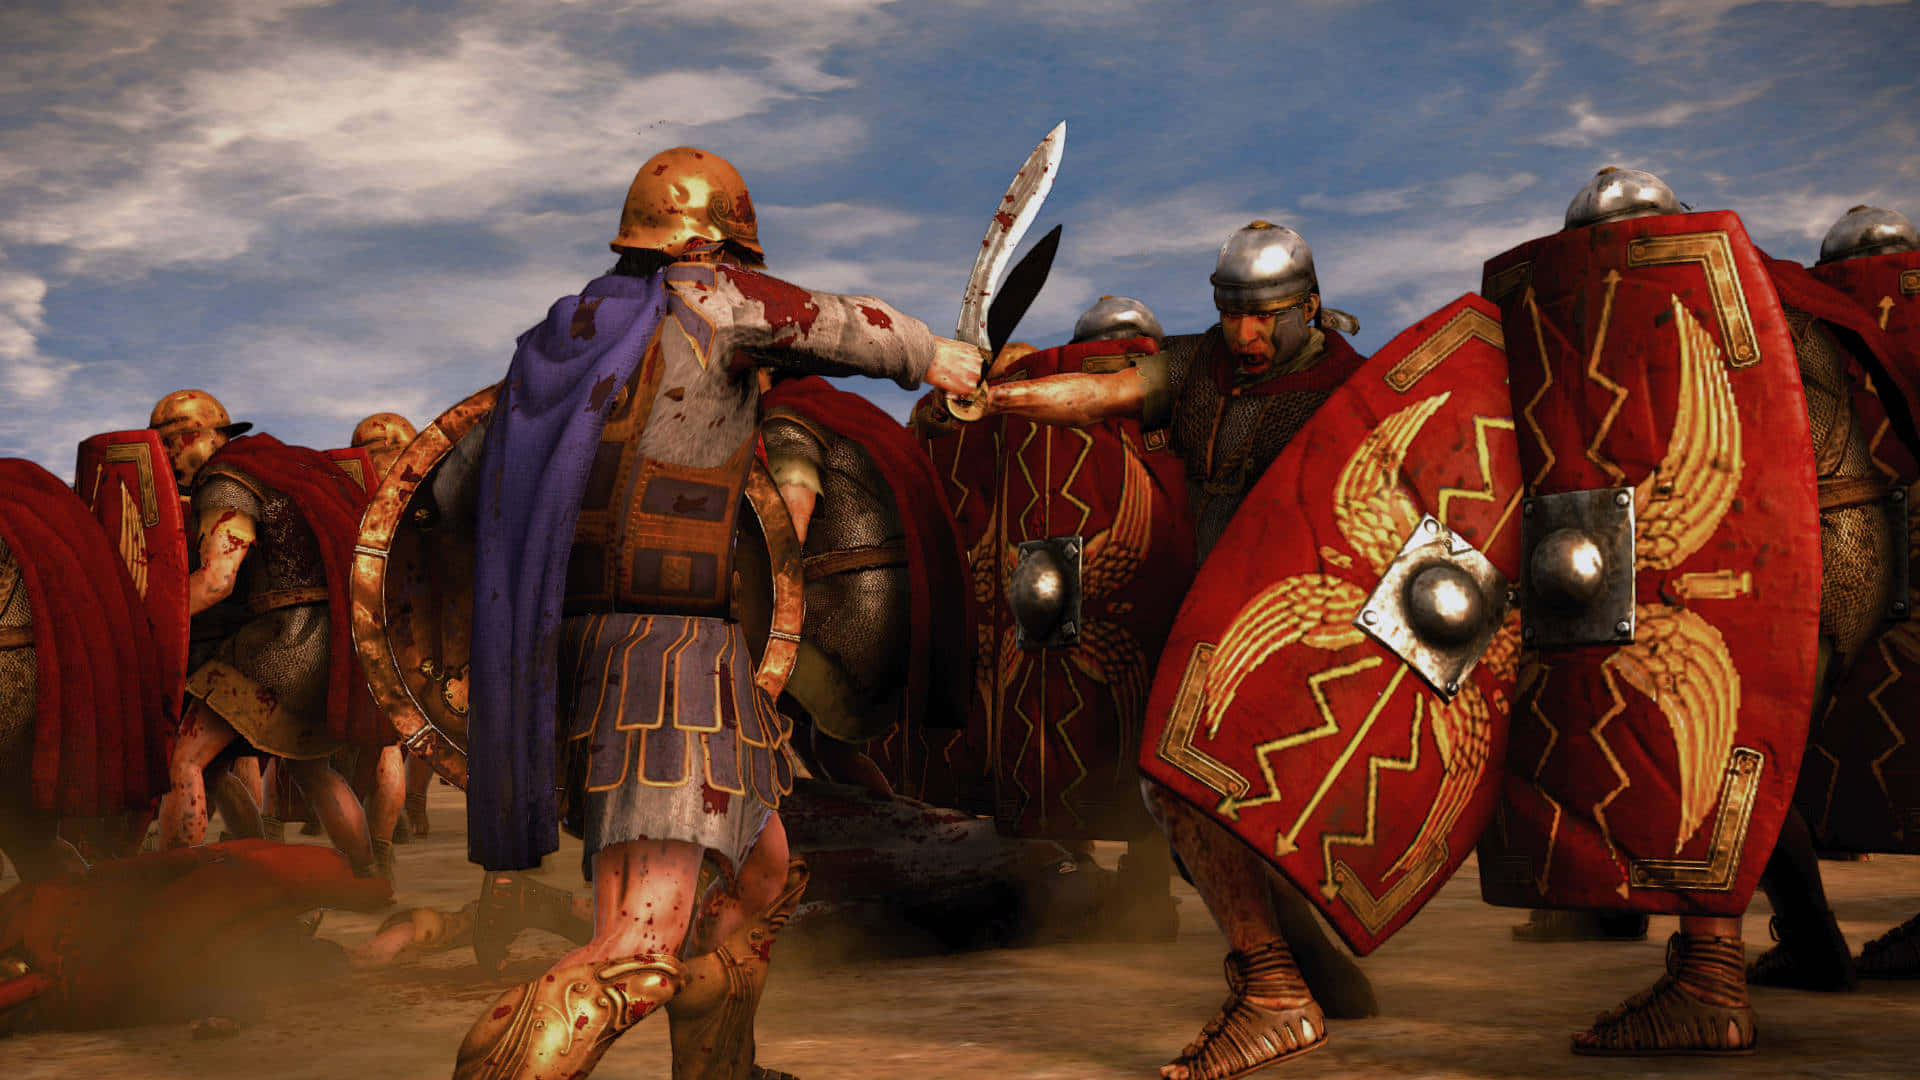 A Group Of Roman Soldiers Are Standing In A Desert